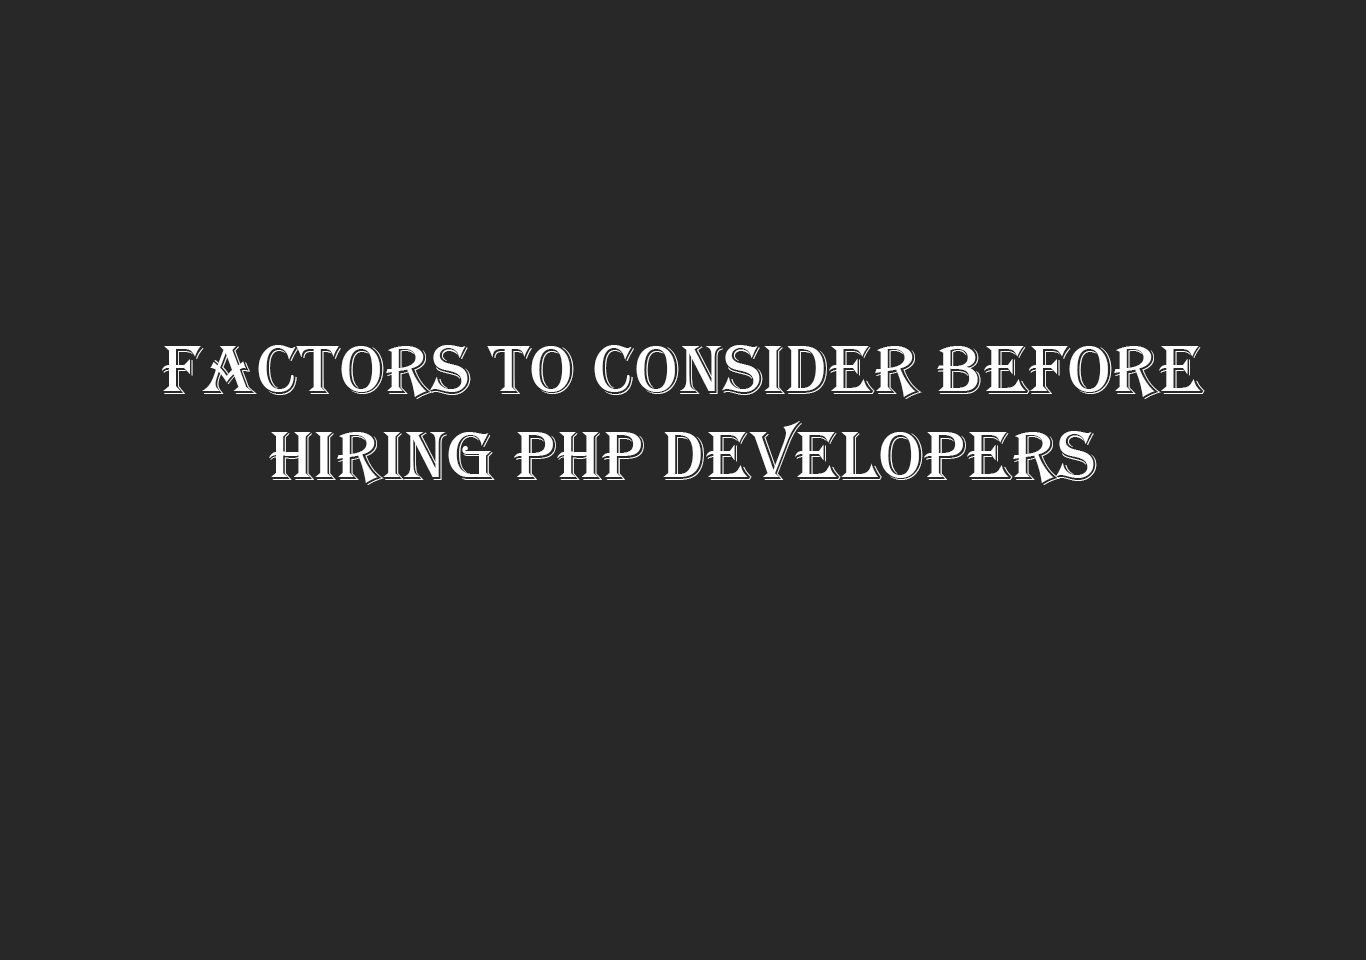 Factors to consider before hiring PHP developers